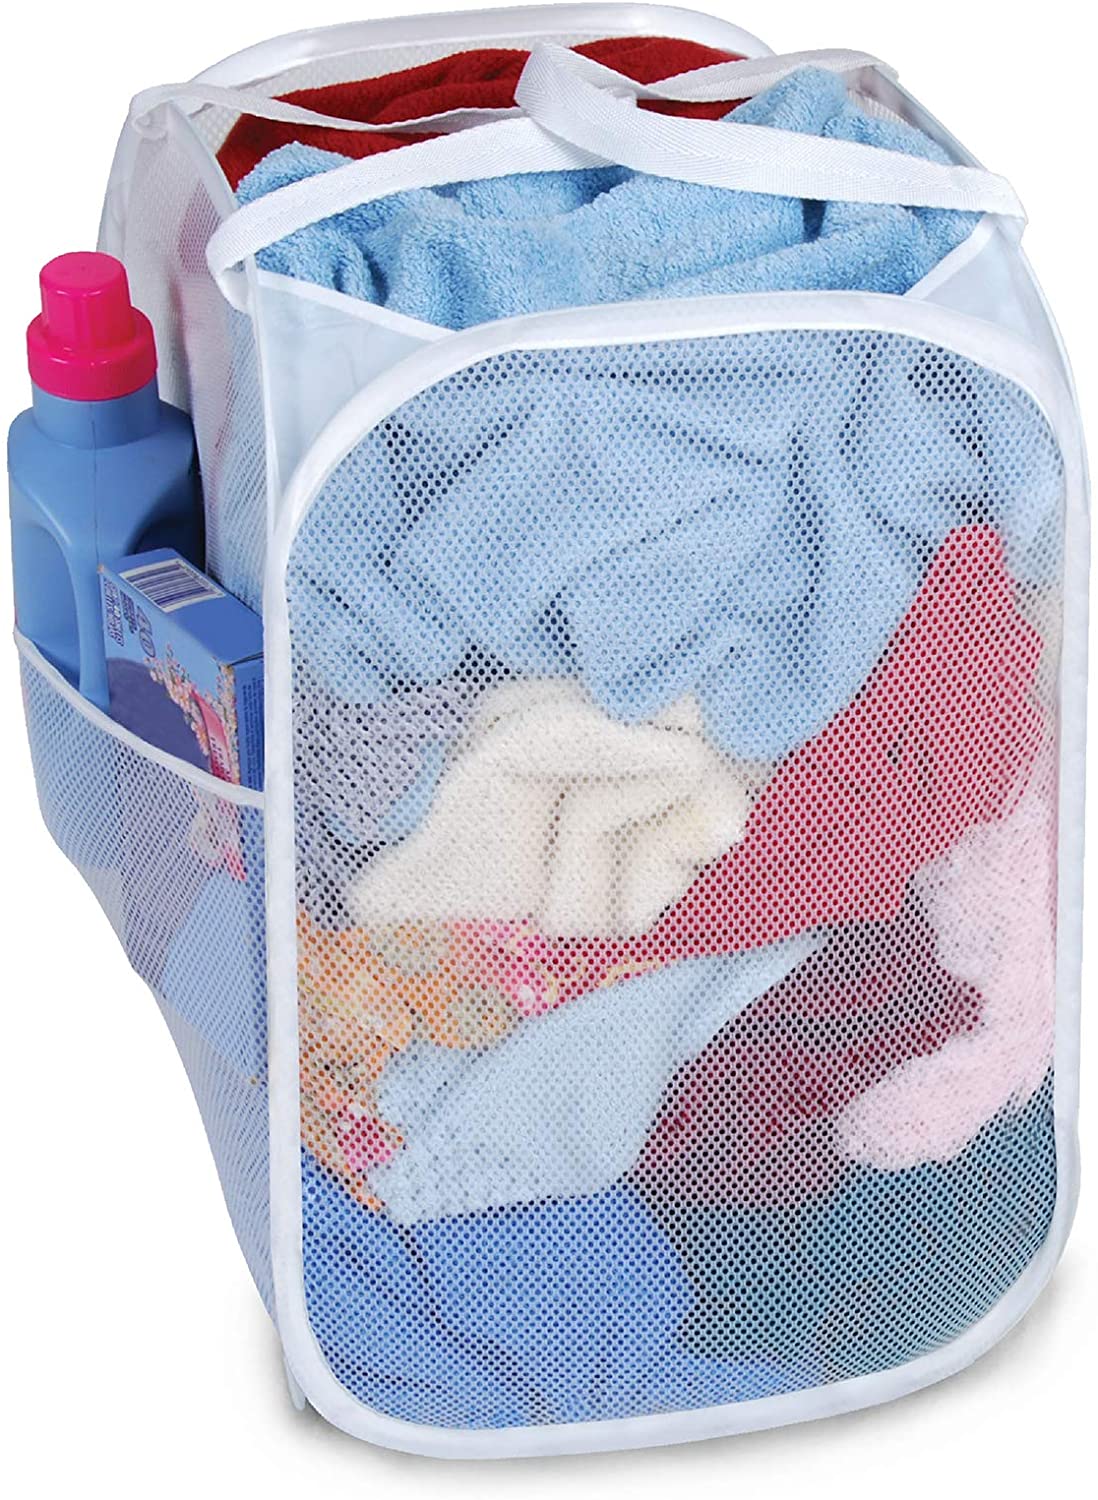 Pop-Up Laundry Hamper with Easy Carry Handles and Side Pocket - Smart Design® 8